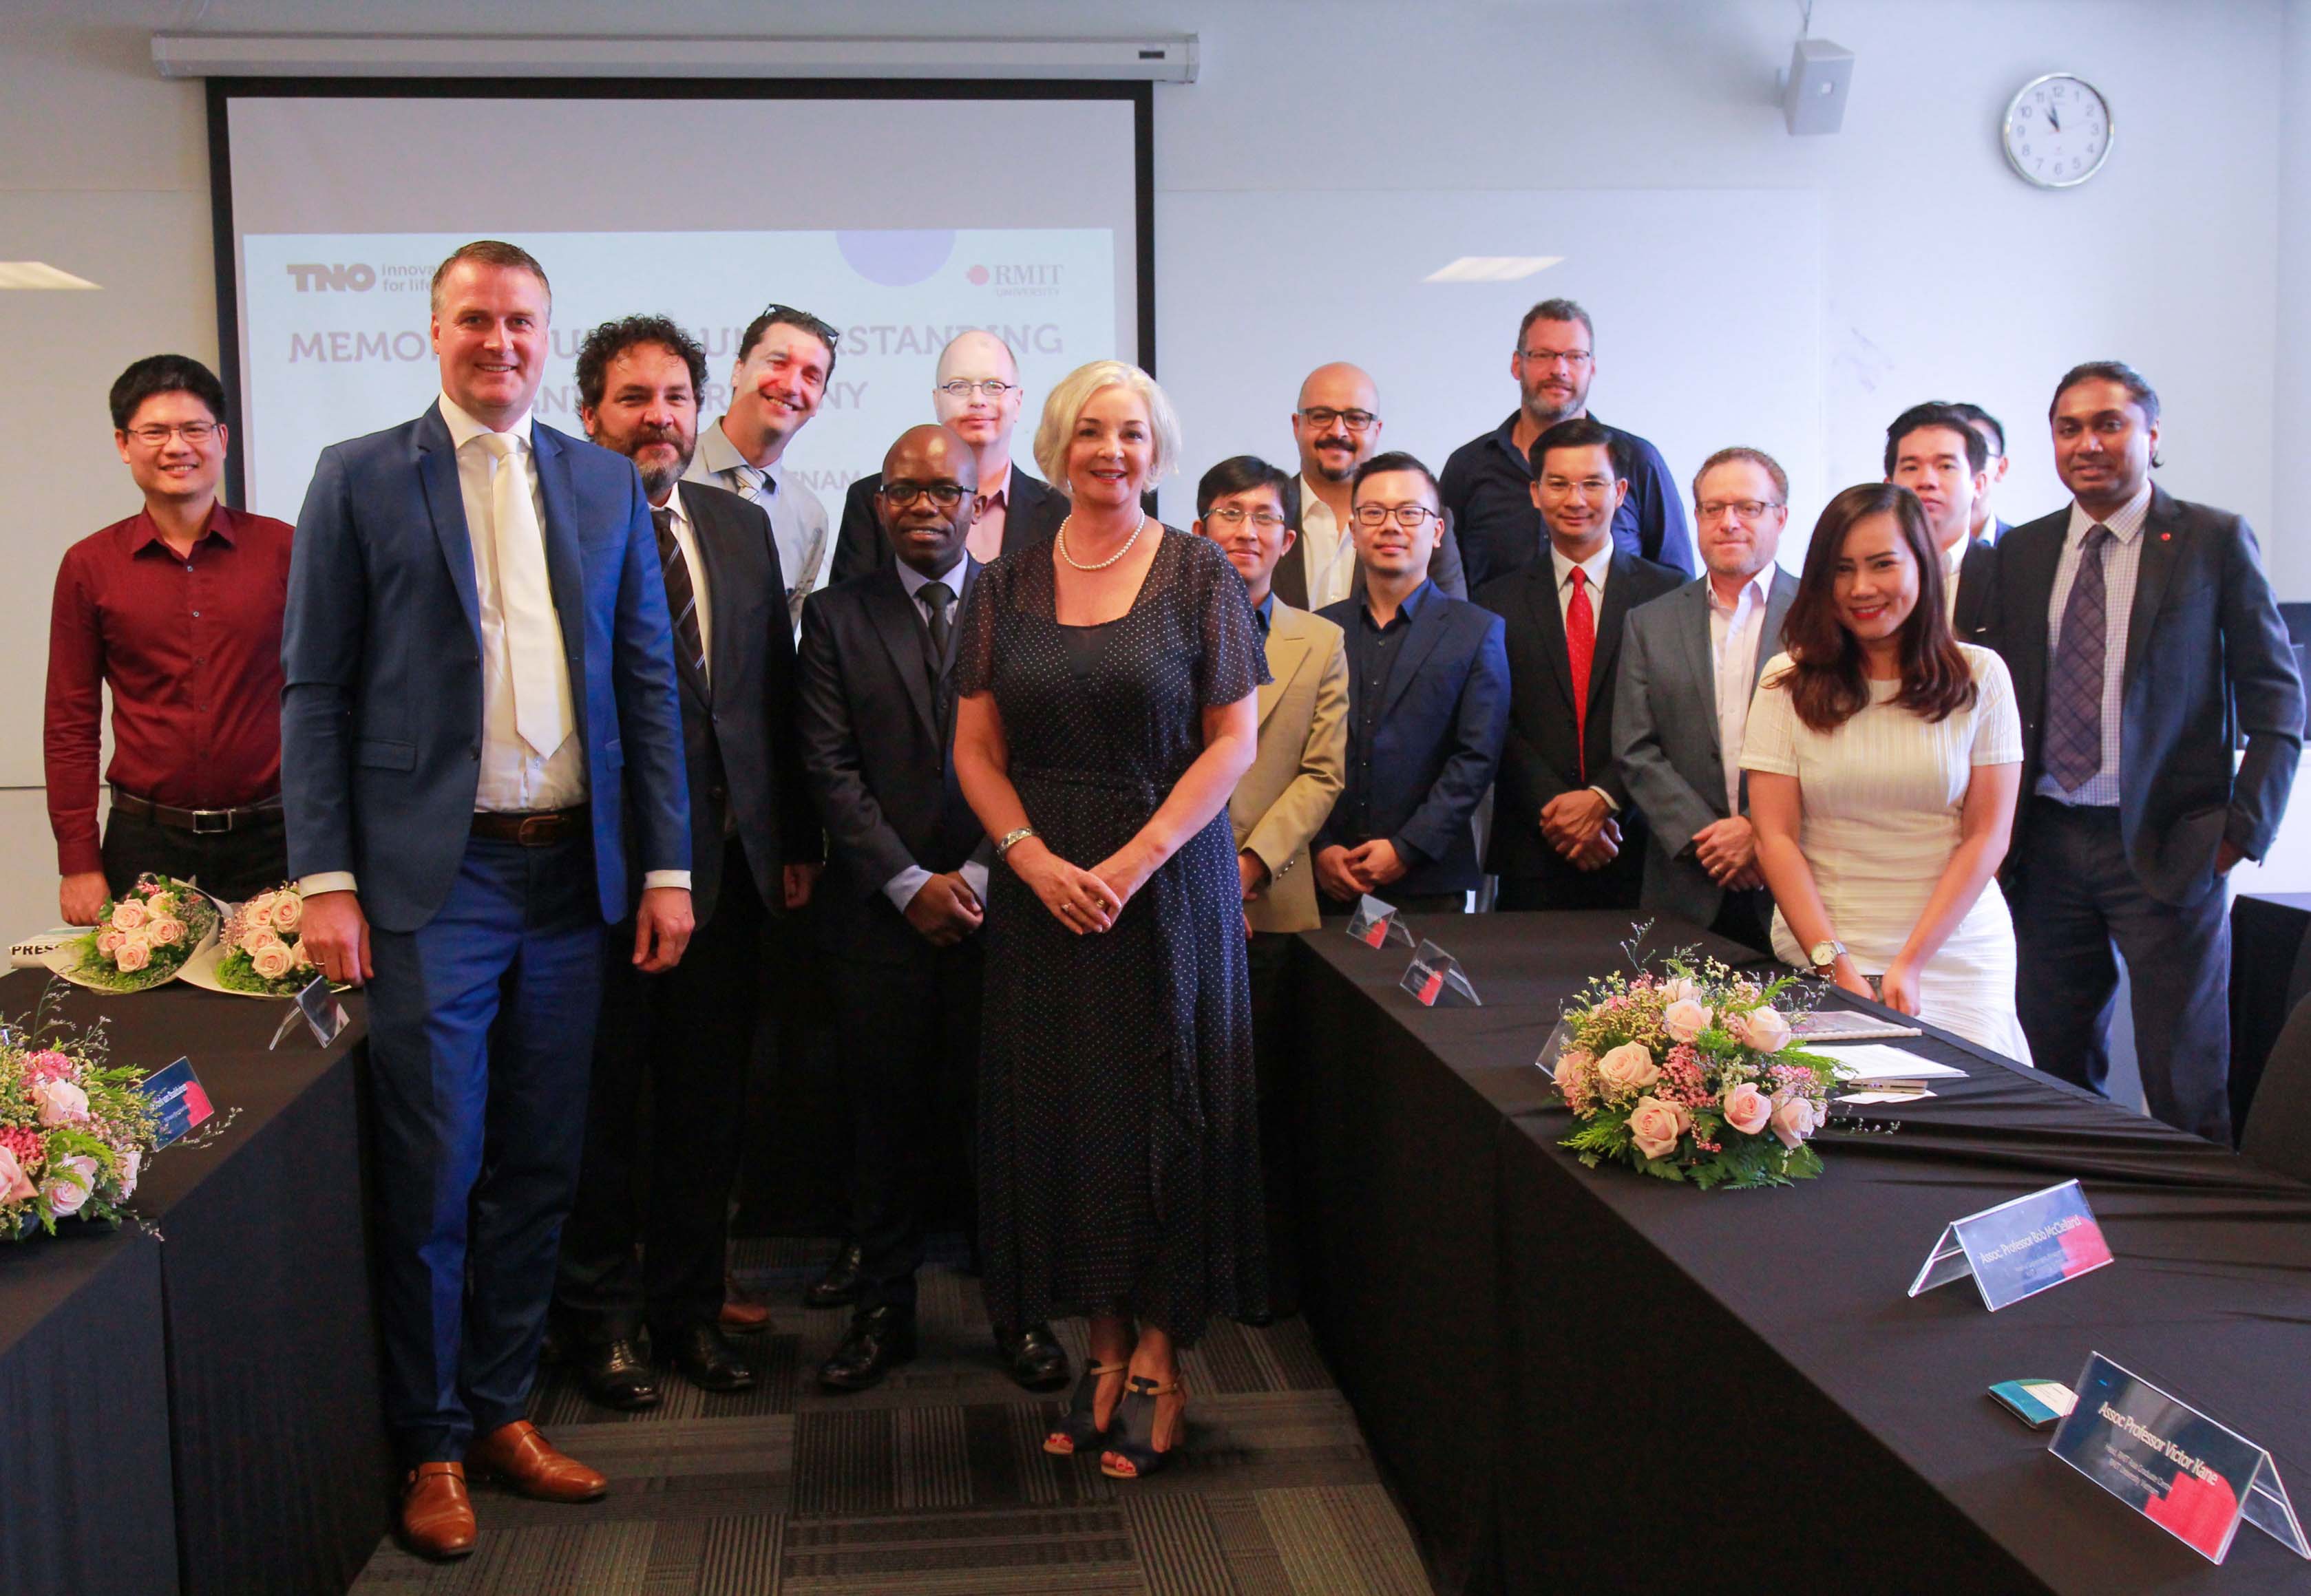 The signing ceremony was witnessed by representatives from RMIT University and TNO.